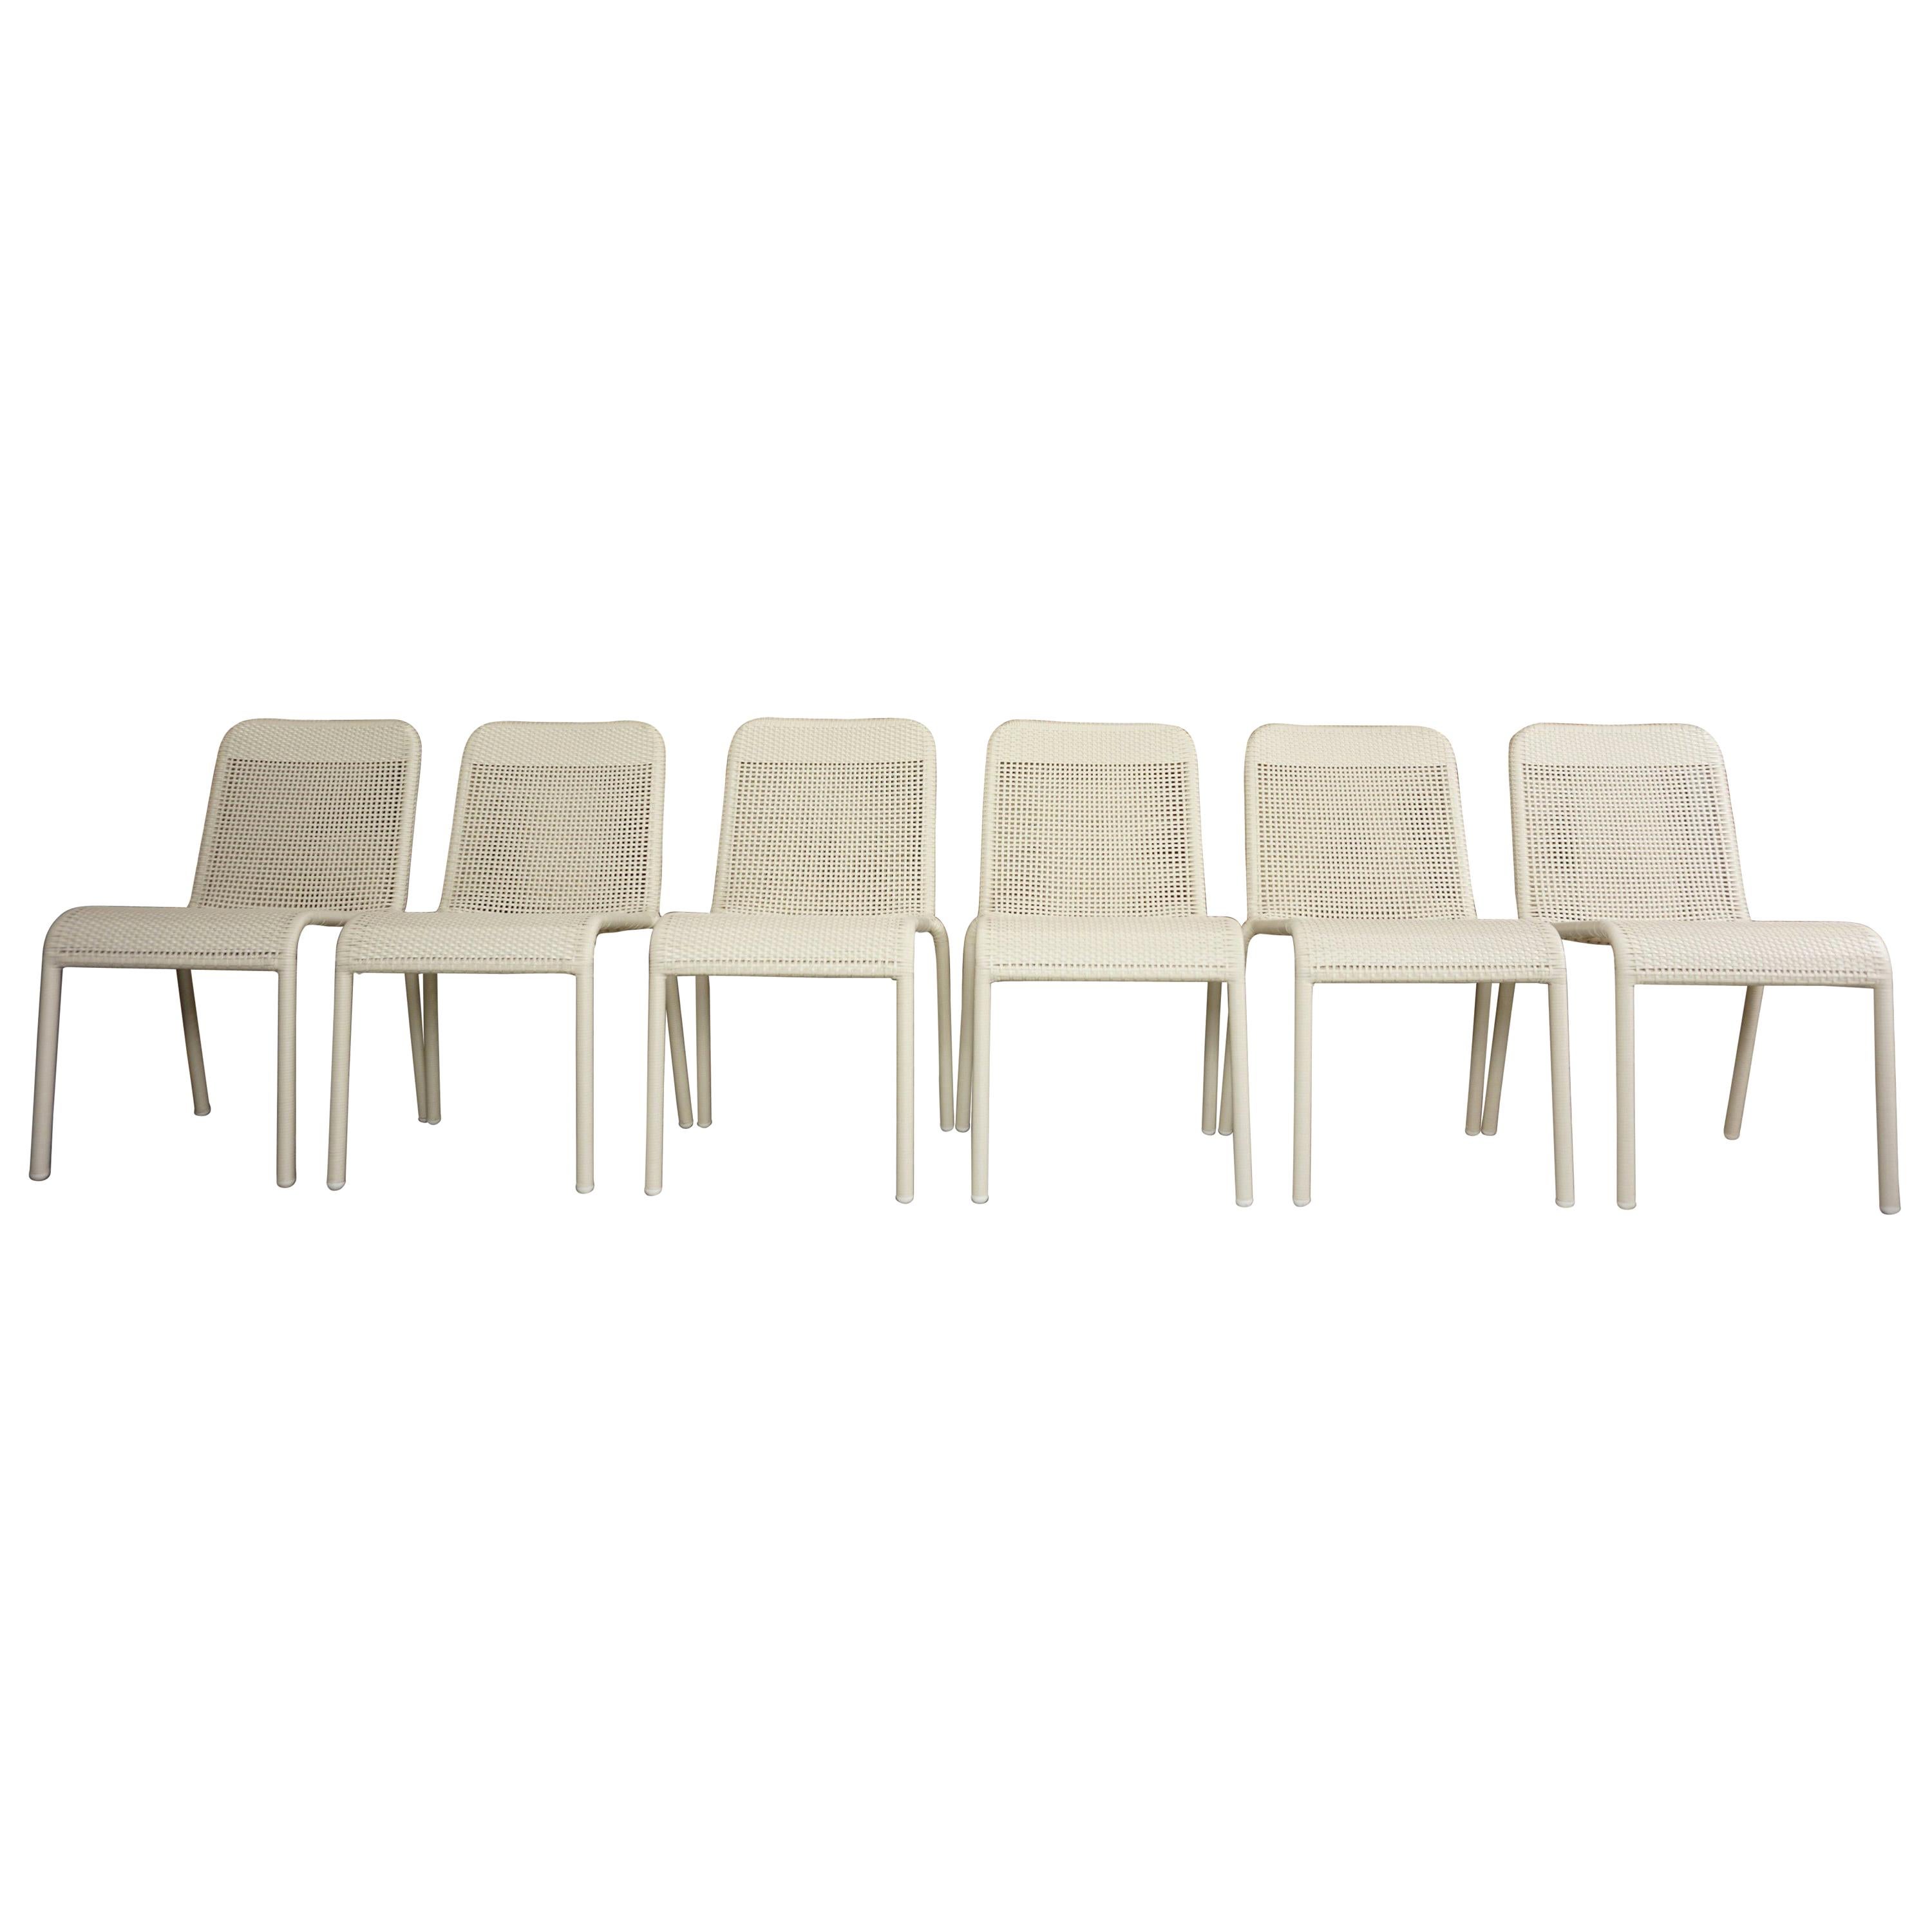 Set of Six Braided Resin in Warm White Color Outdoor Chairs